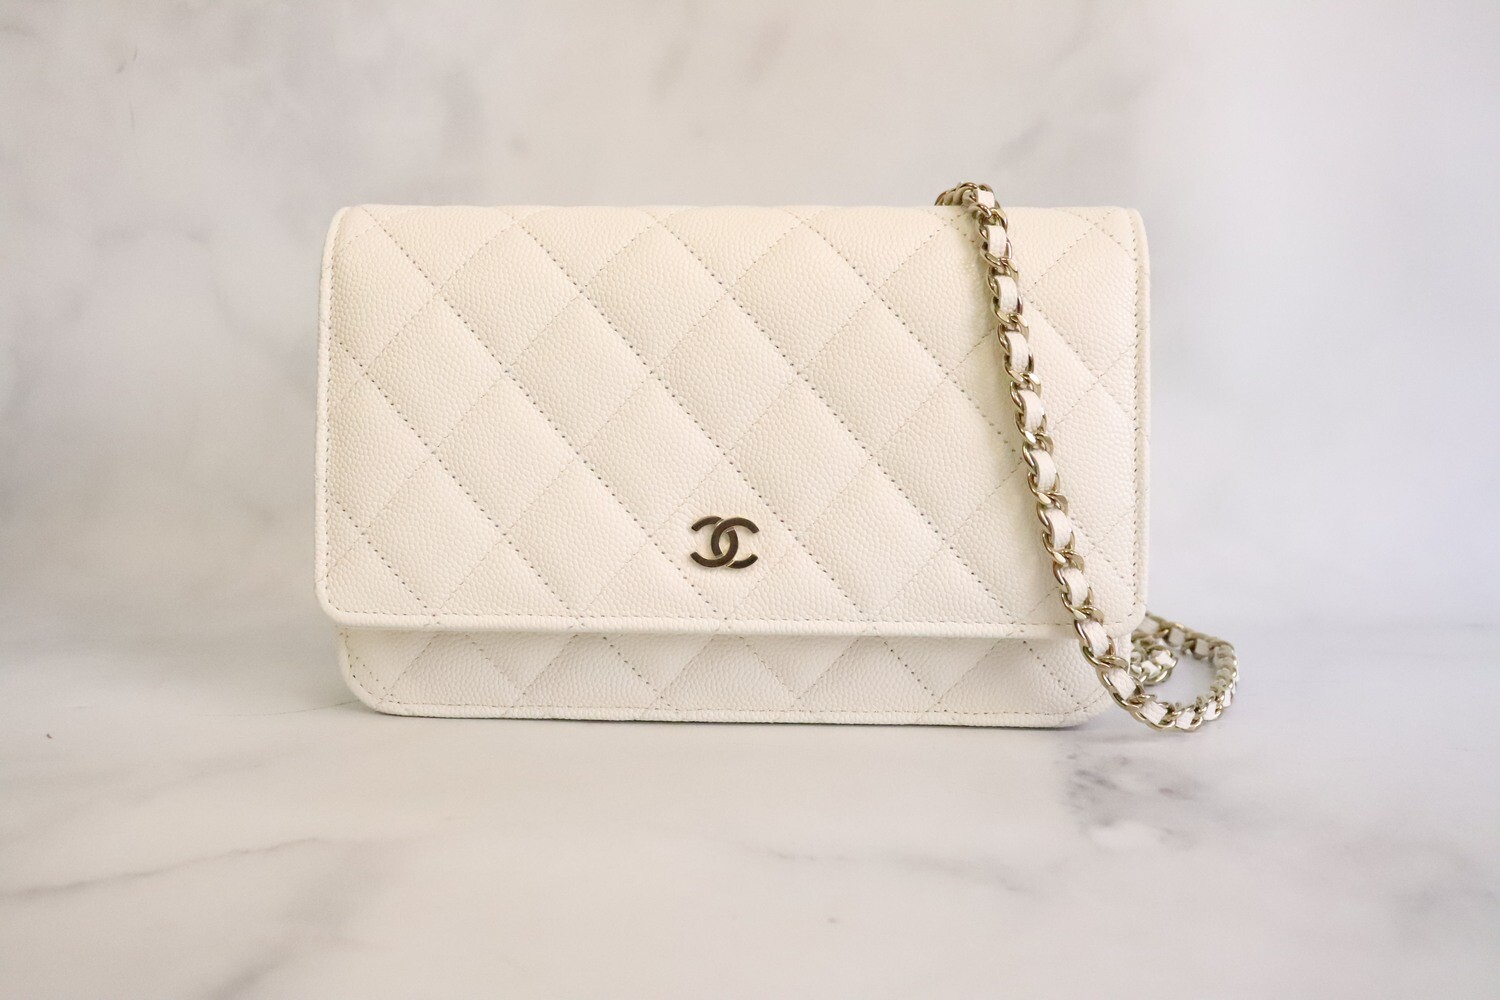 Chanel Wallet on Chain, White Caviar Leather, Gold Hardware, New in Box -  Julia Rose Boston